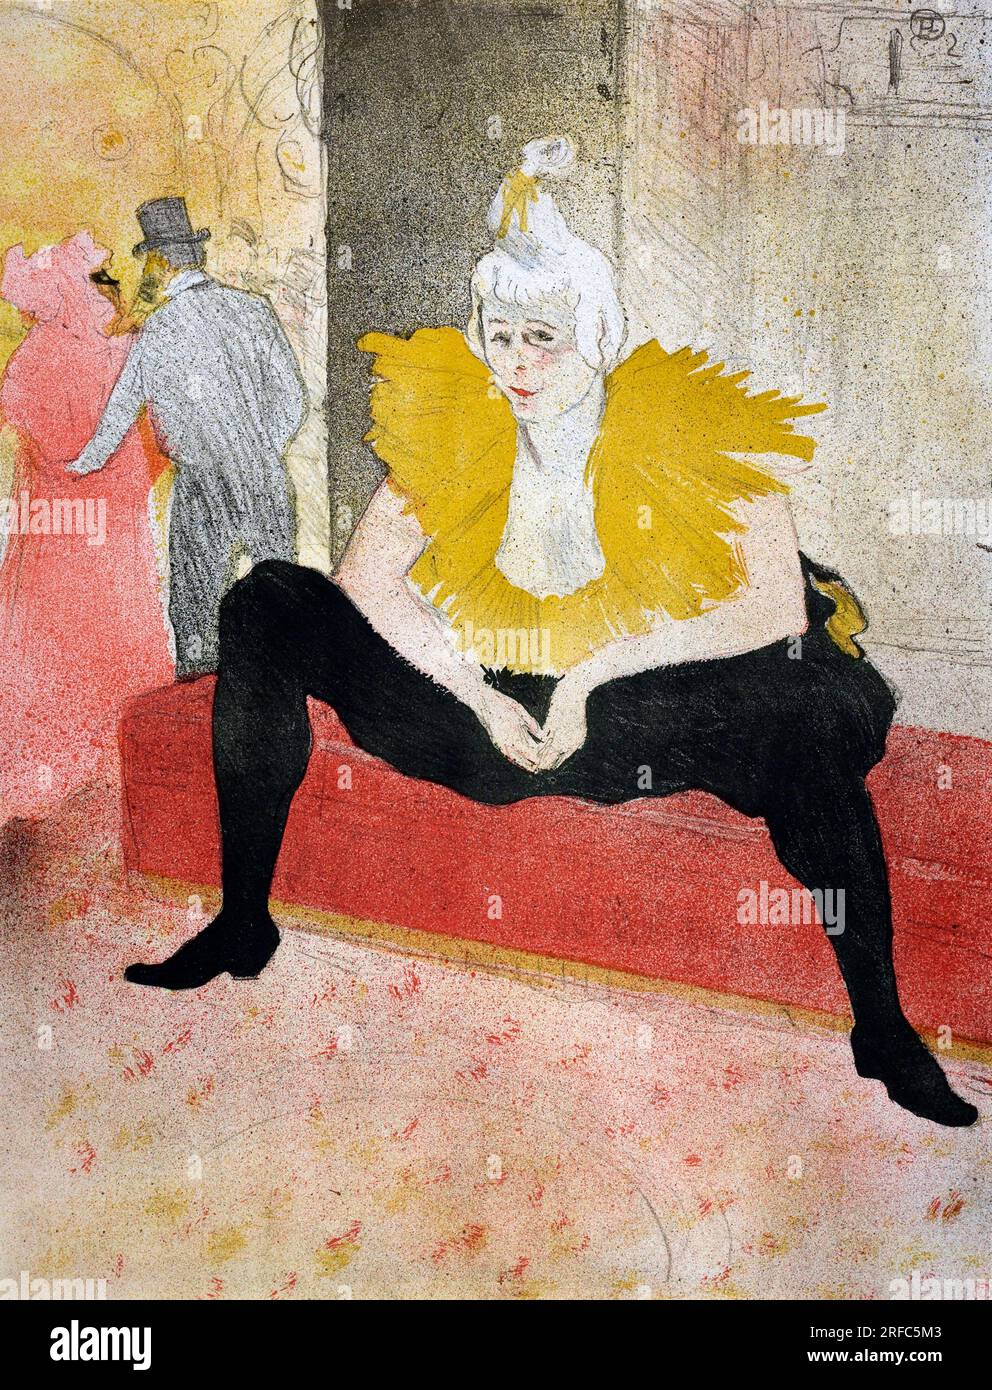 Toulouse-Lautrec. Painting entitled 'The Seated Clowness' by Henri de Toulouse-Lautrec (1864-1901), lithograph in three colors on wove paper, 1896 Stock Photo